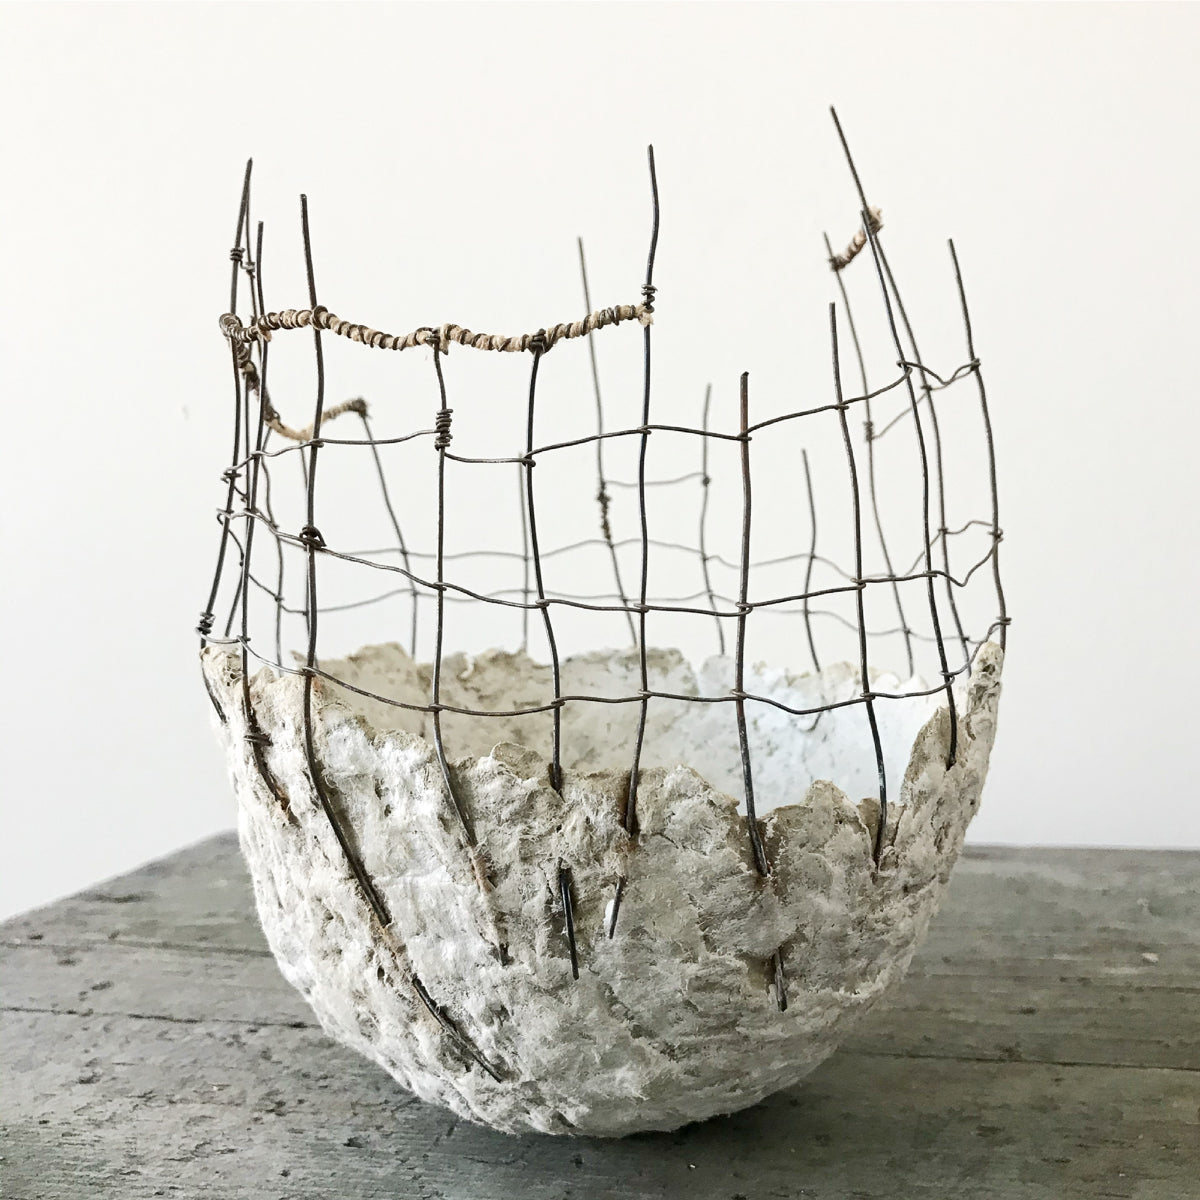 Handmade by Montana artist Jennifer Alden Design, Vessel Study No. 48 is a contemporary sculpture made from paper clay, paint, wire and hemp. Each unique vessel in this collection is one-of-a-kind, rare, and both primitive and modern. 